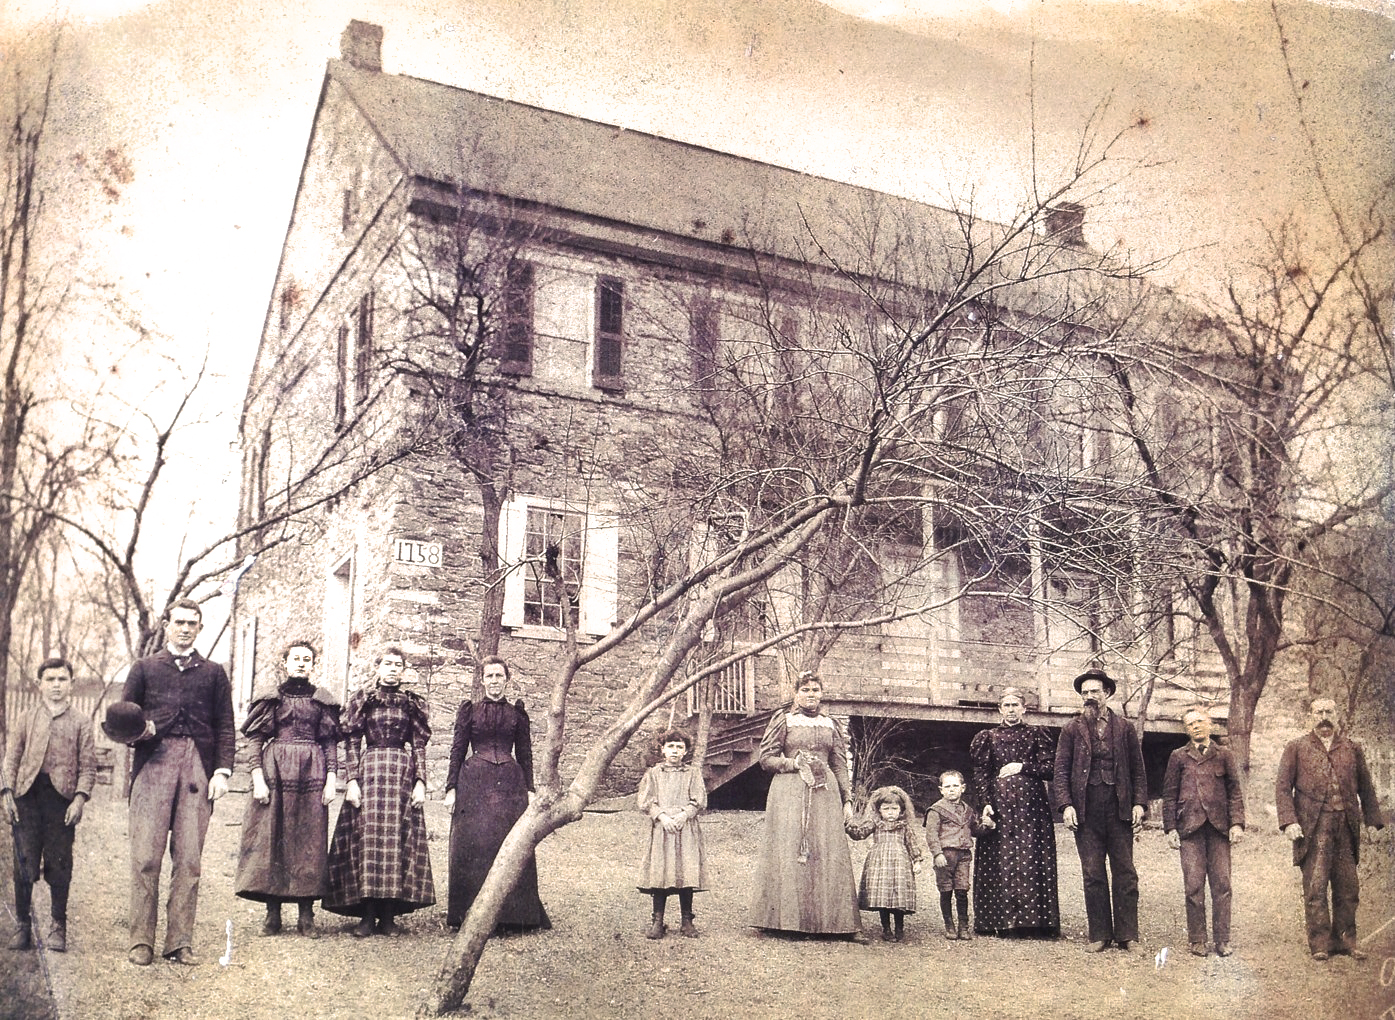 02 Historic Photo of Existing House.jpg